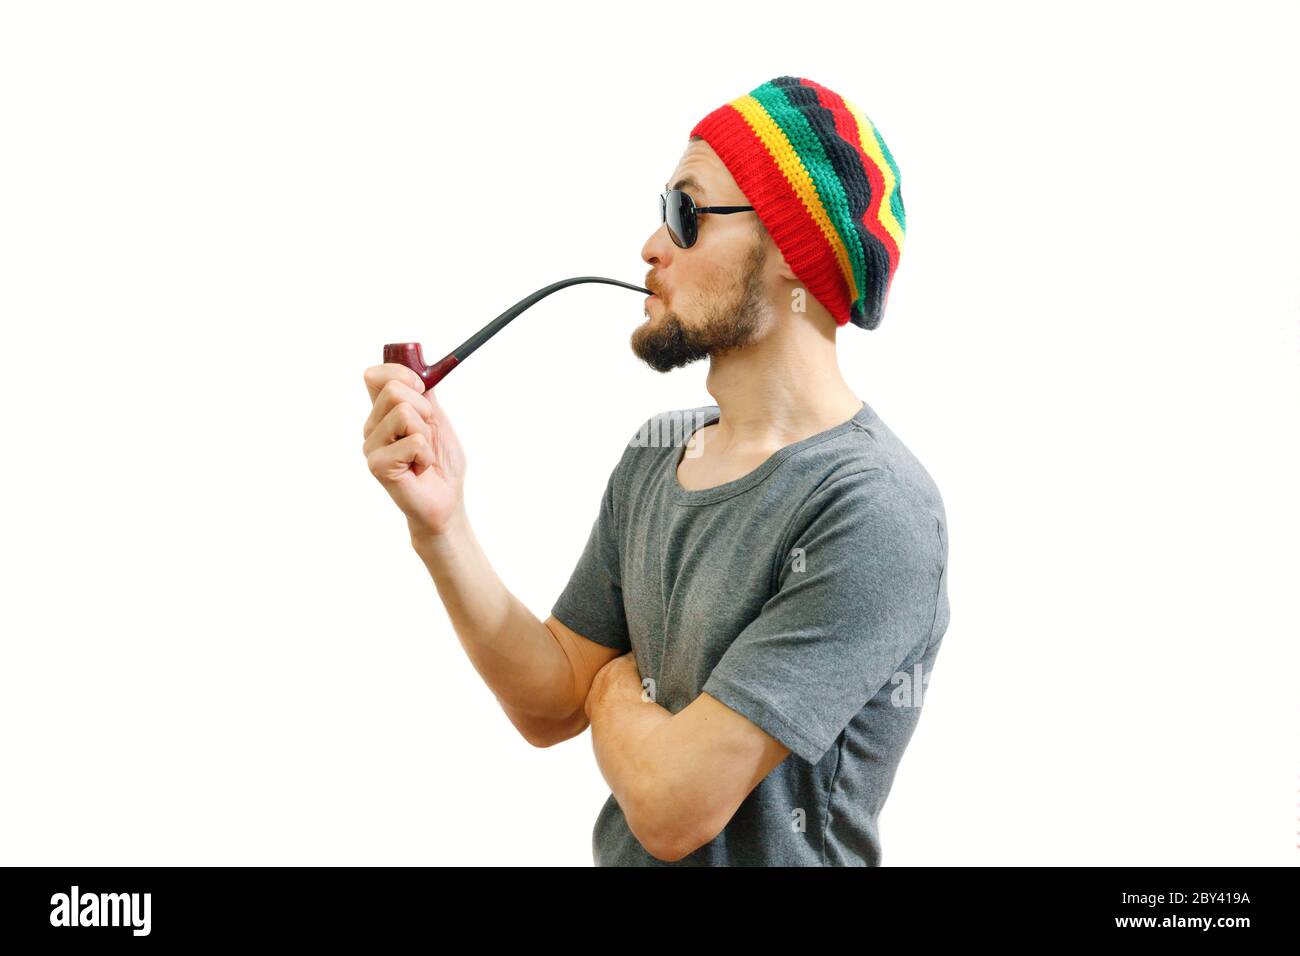 Young caucasian rasta man in jamaica hat, sunglasses and grey t-shirt on  white background with smoke pipe in hand Stock Photo - Alamy